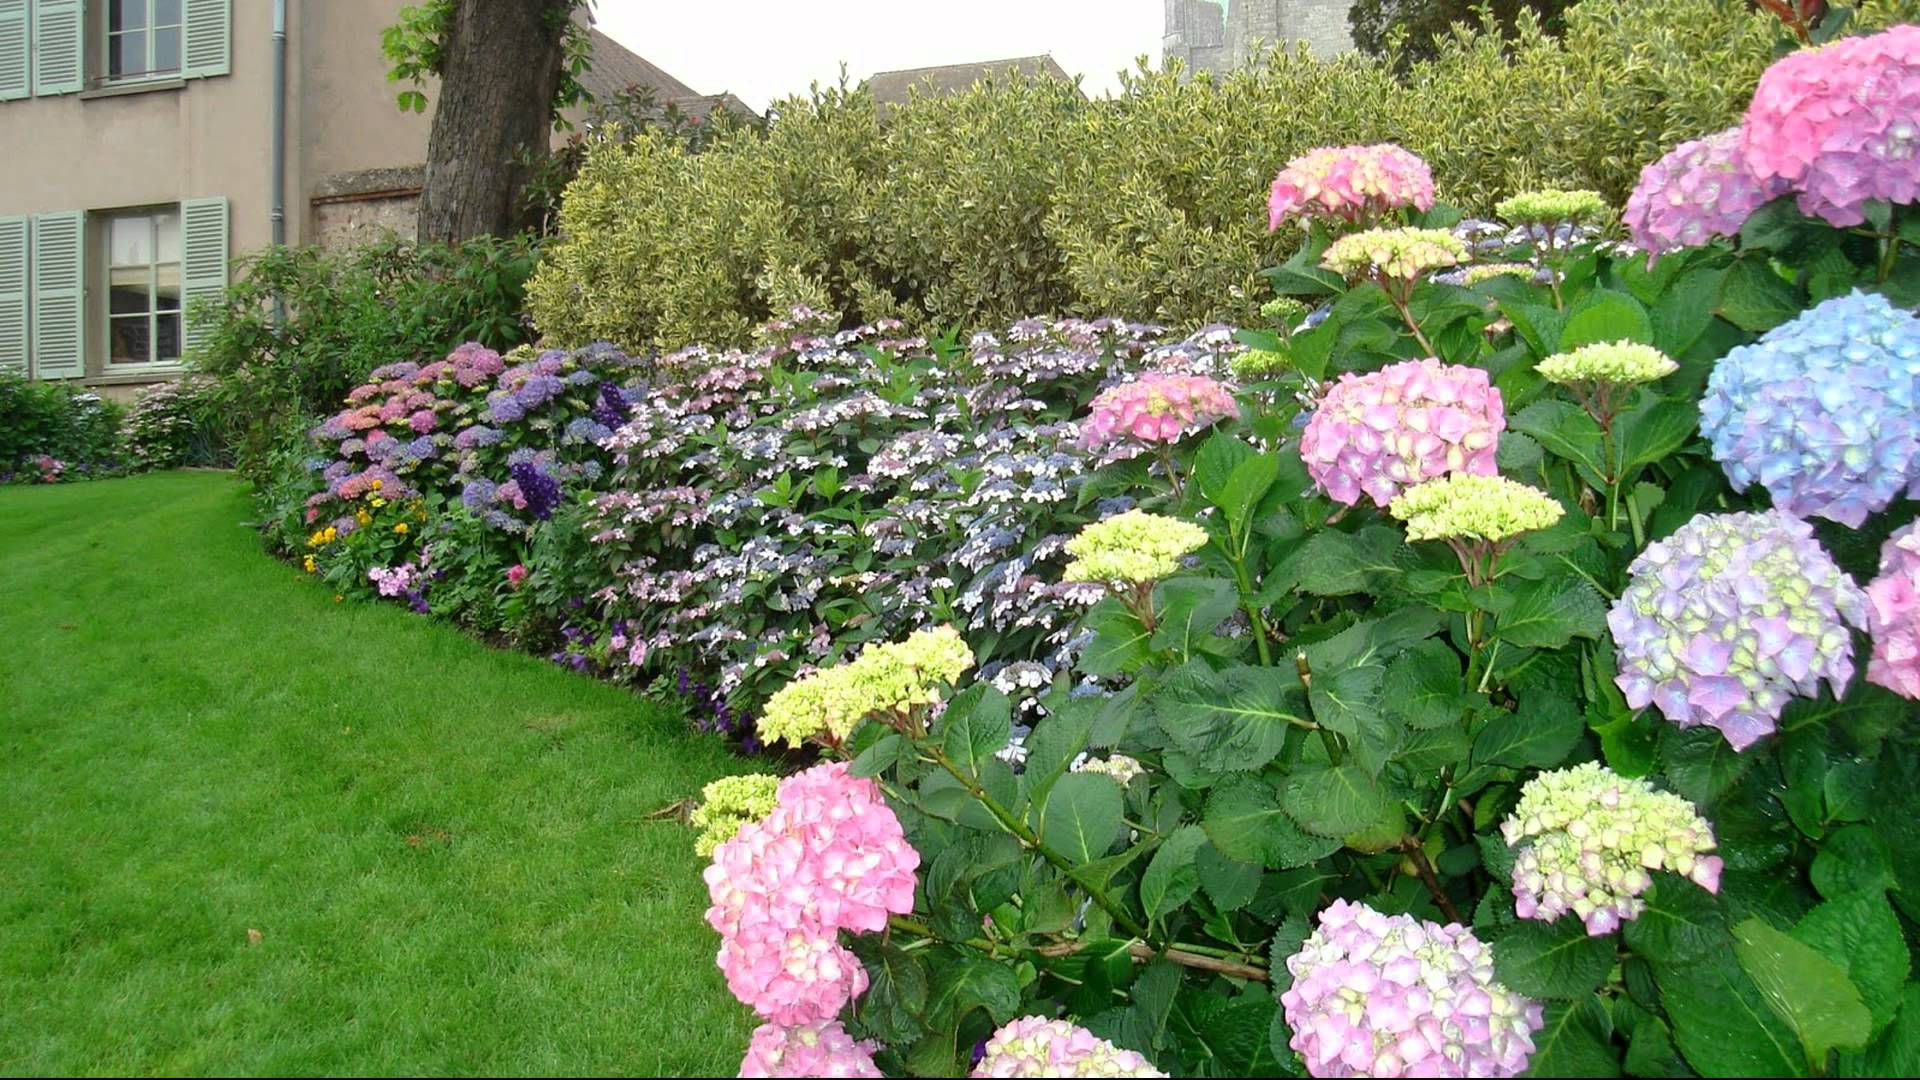 Enhance the Beauty of Your Home with a Flower Garden - YouTube